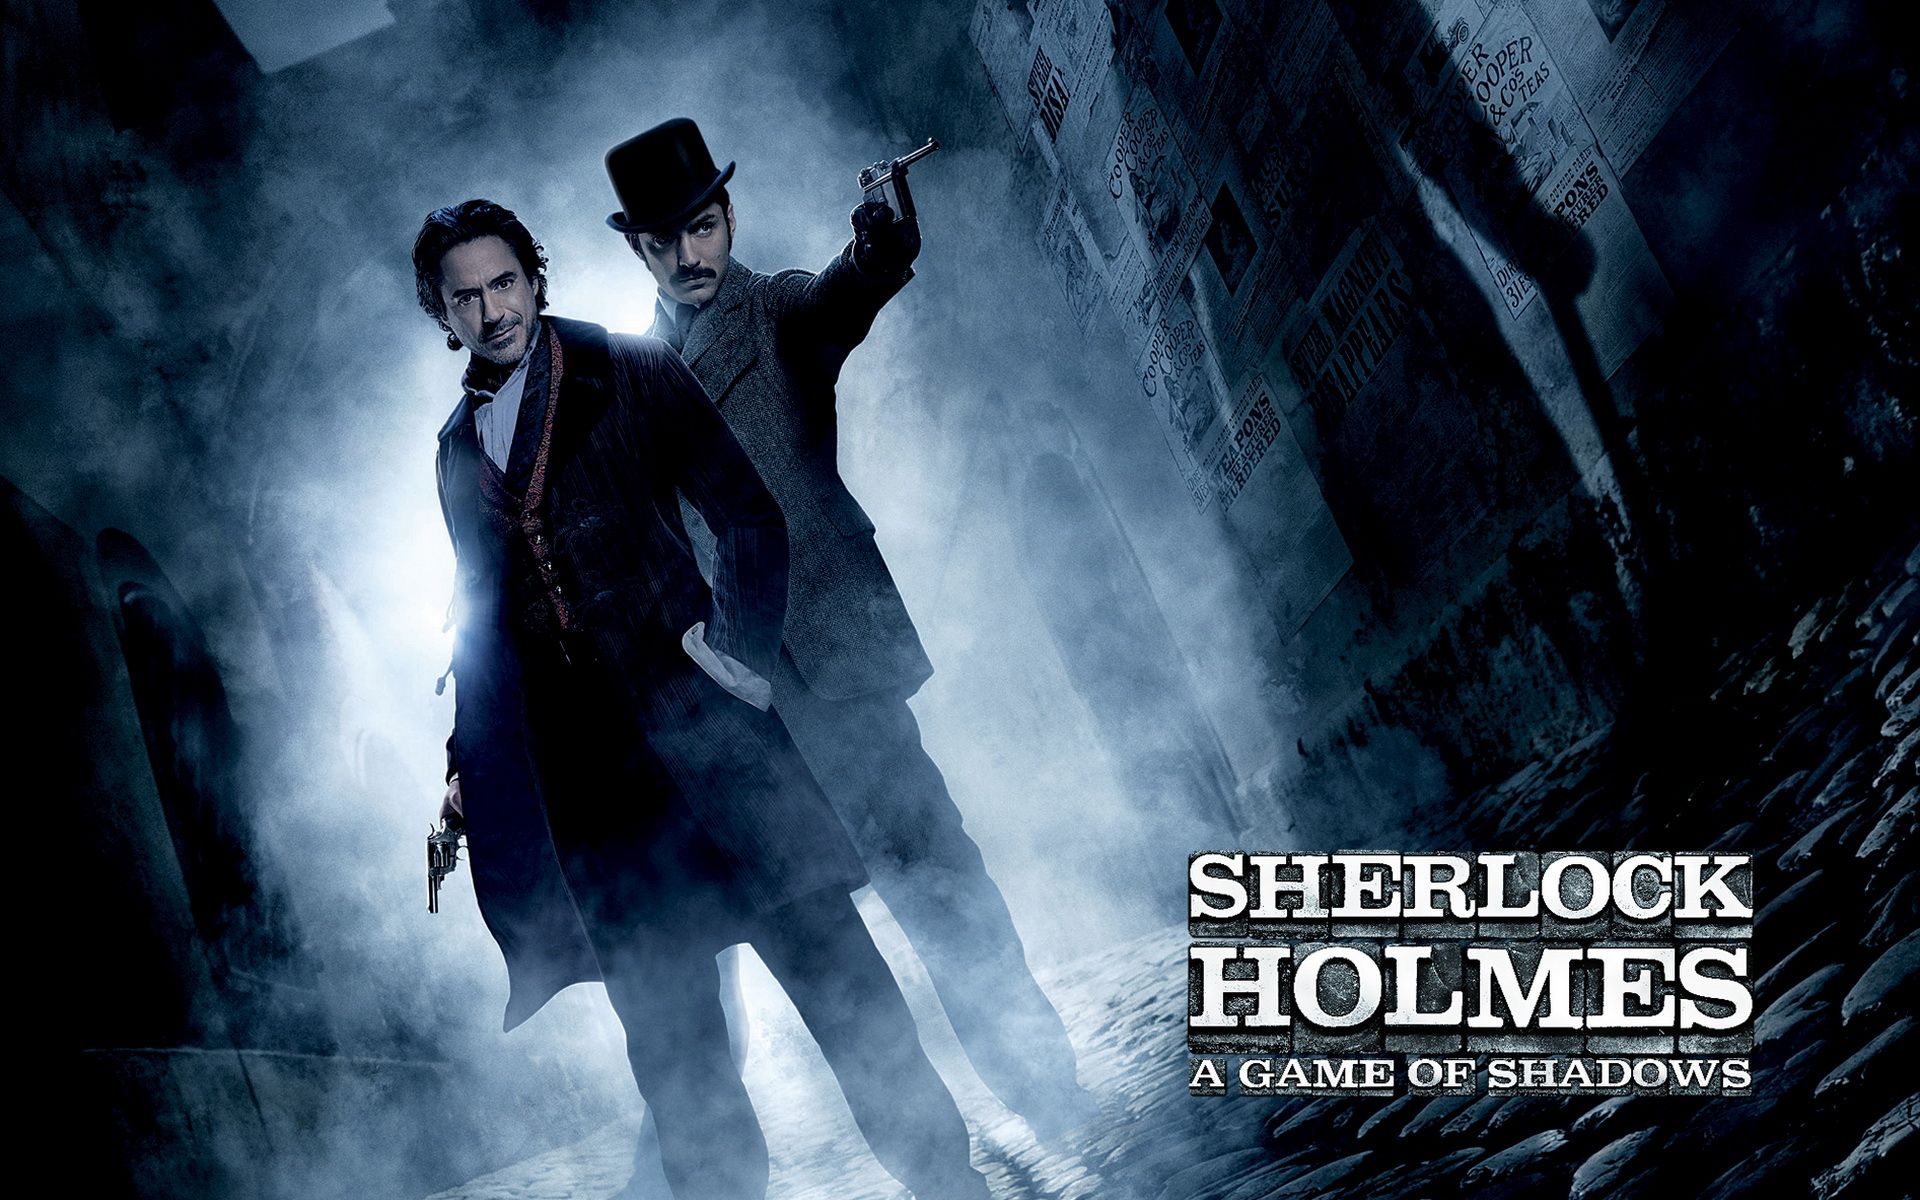 Sherlock Holmes The Game of Shadows wallpapers and images